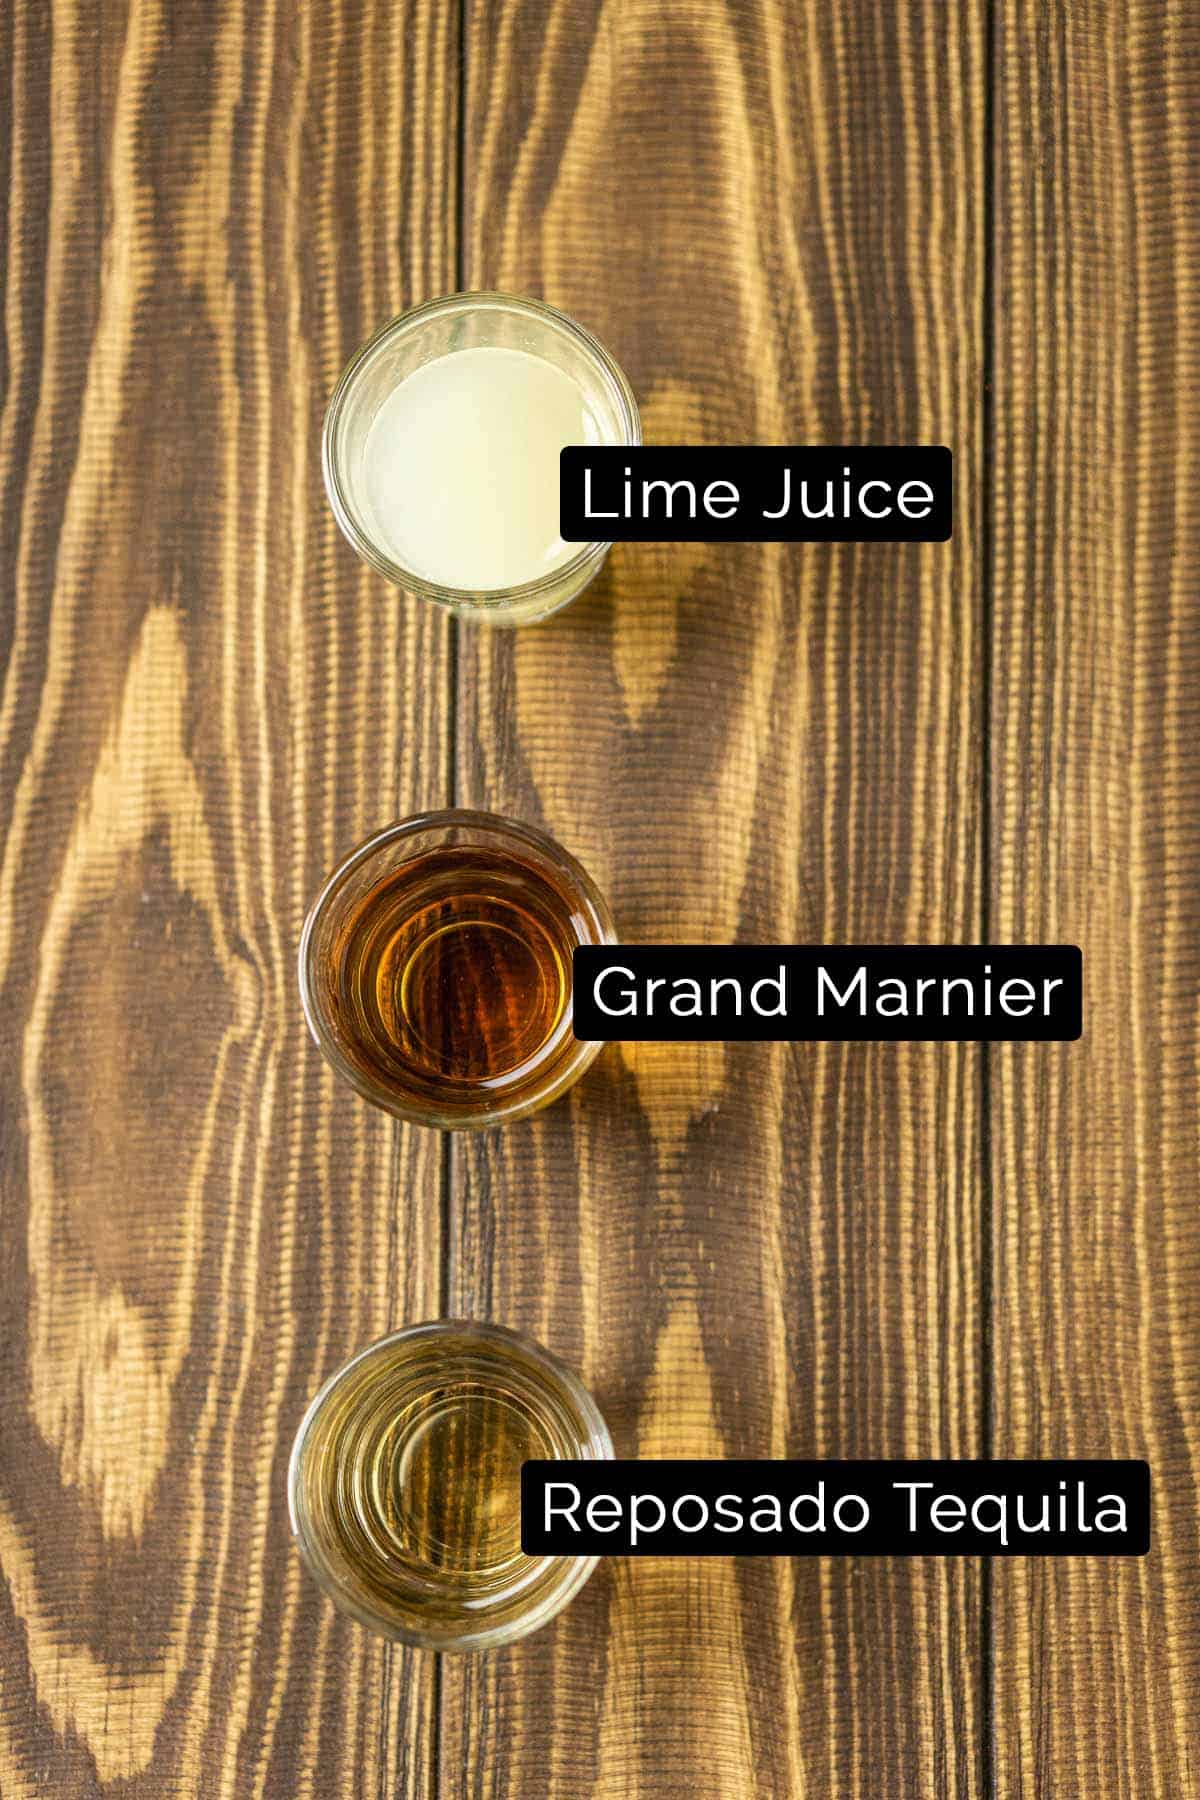 The ingredients on a wooden board with black and white labels.